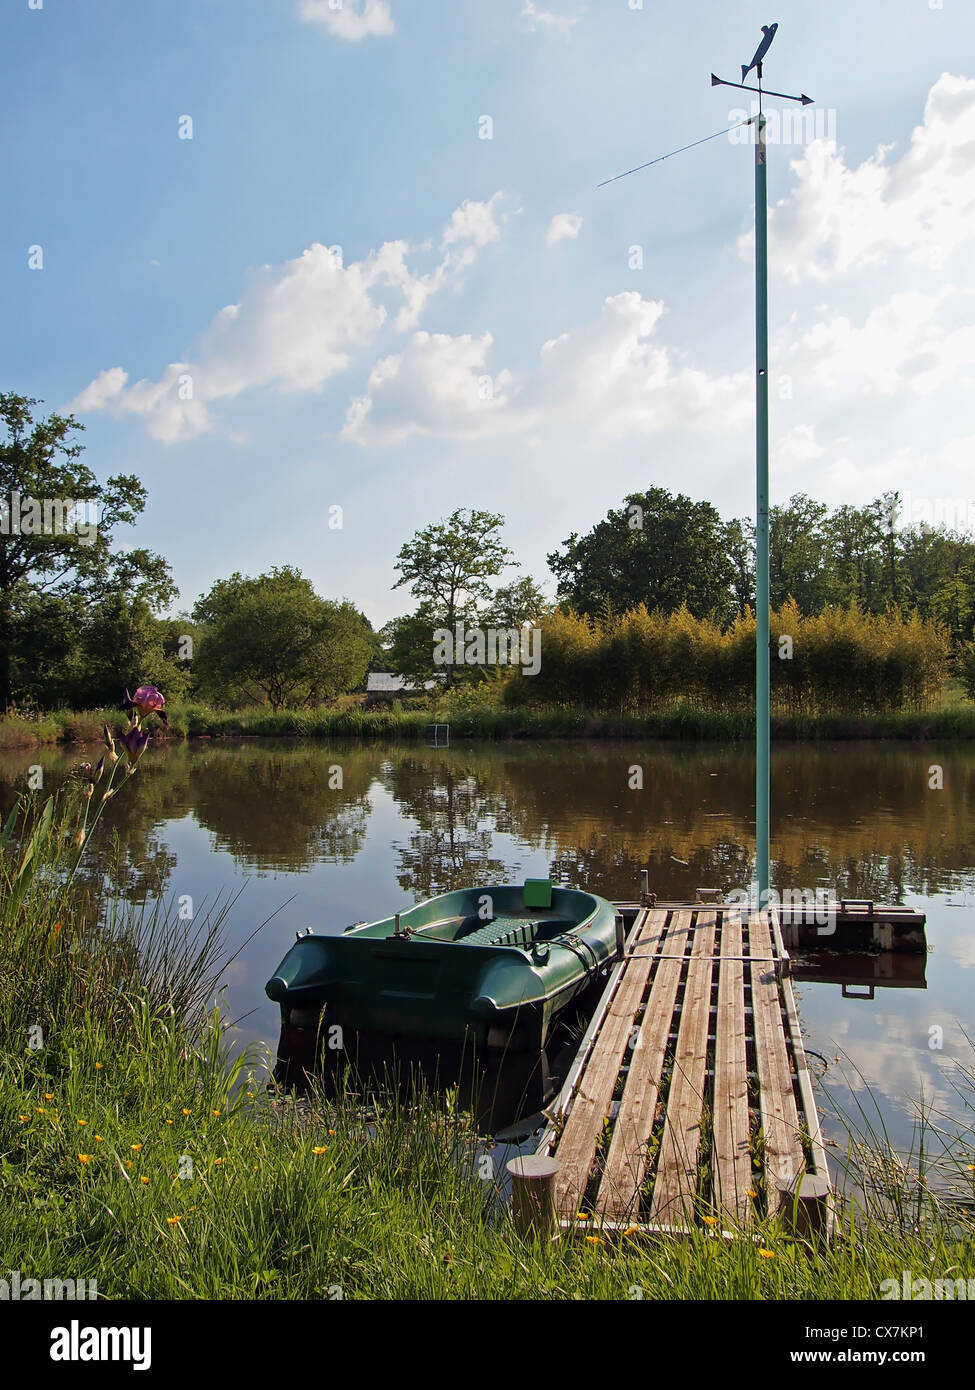 Floating dock on a pond with a small boat and a weather vane Stock Photo